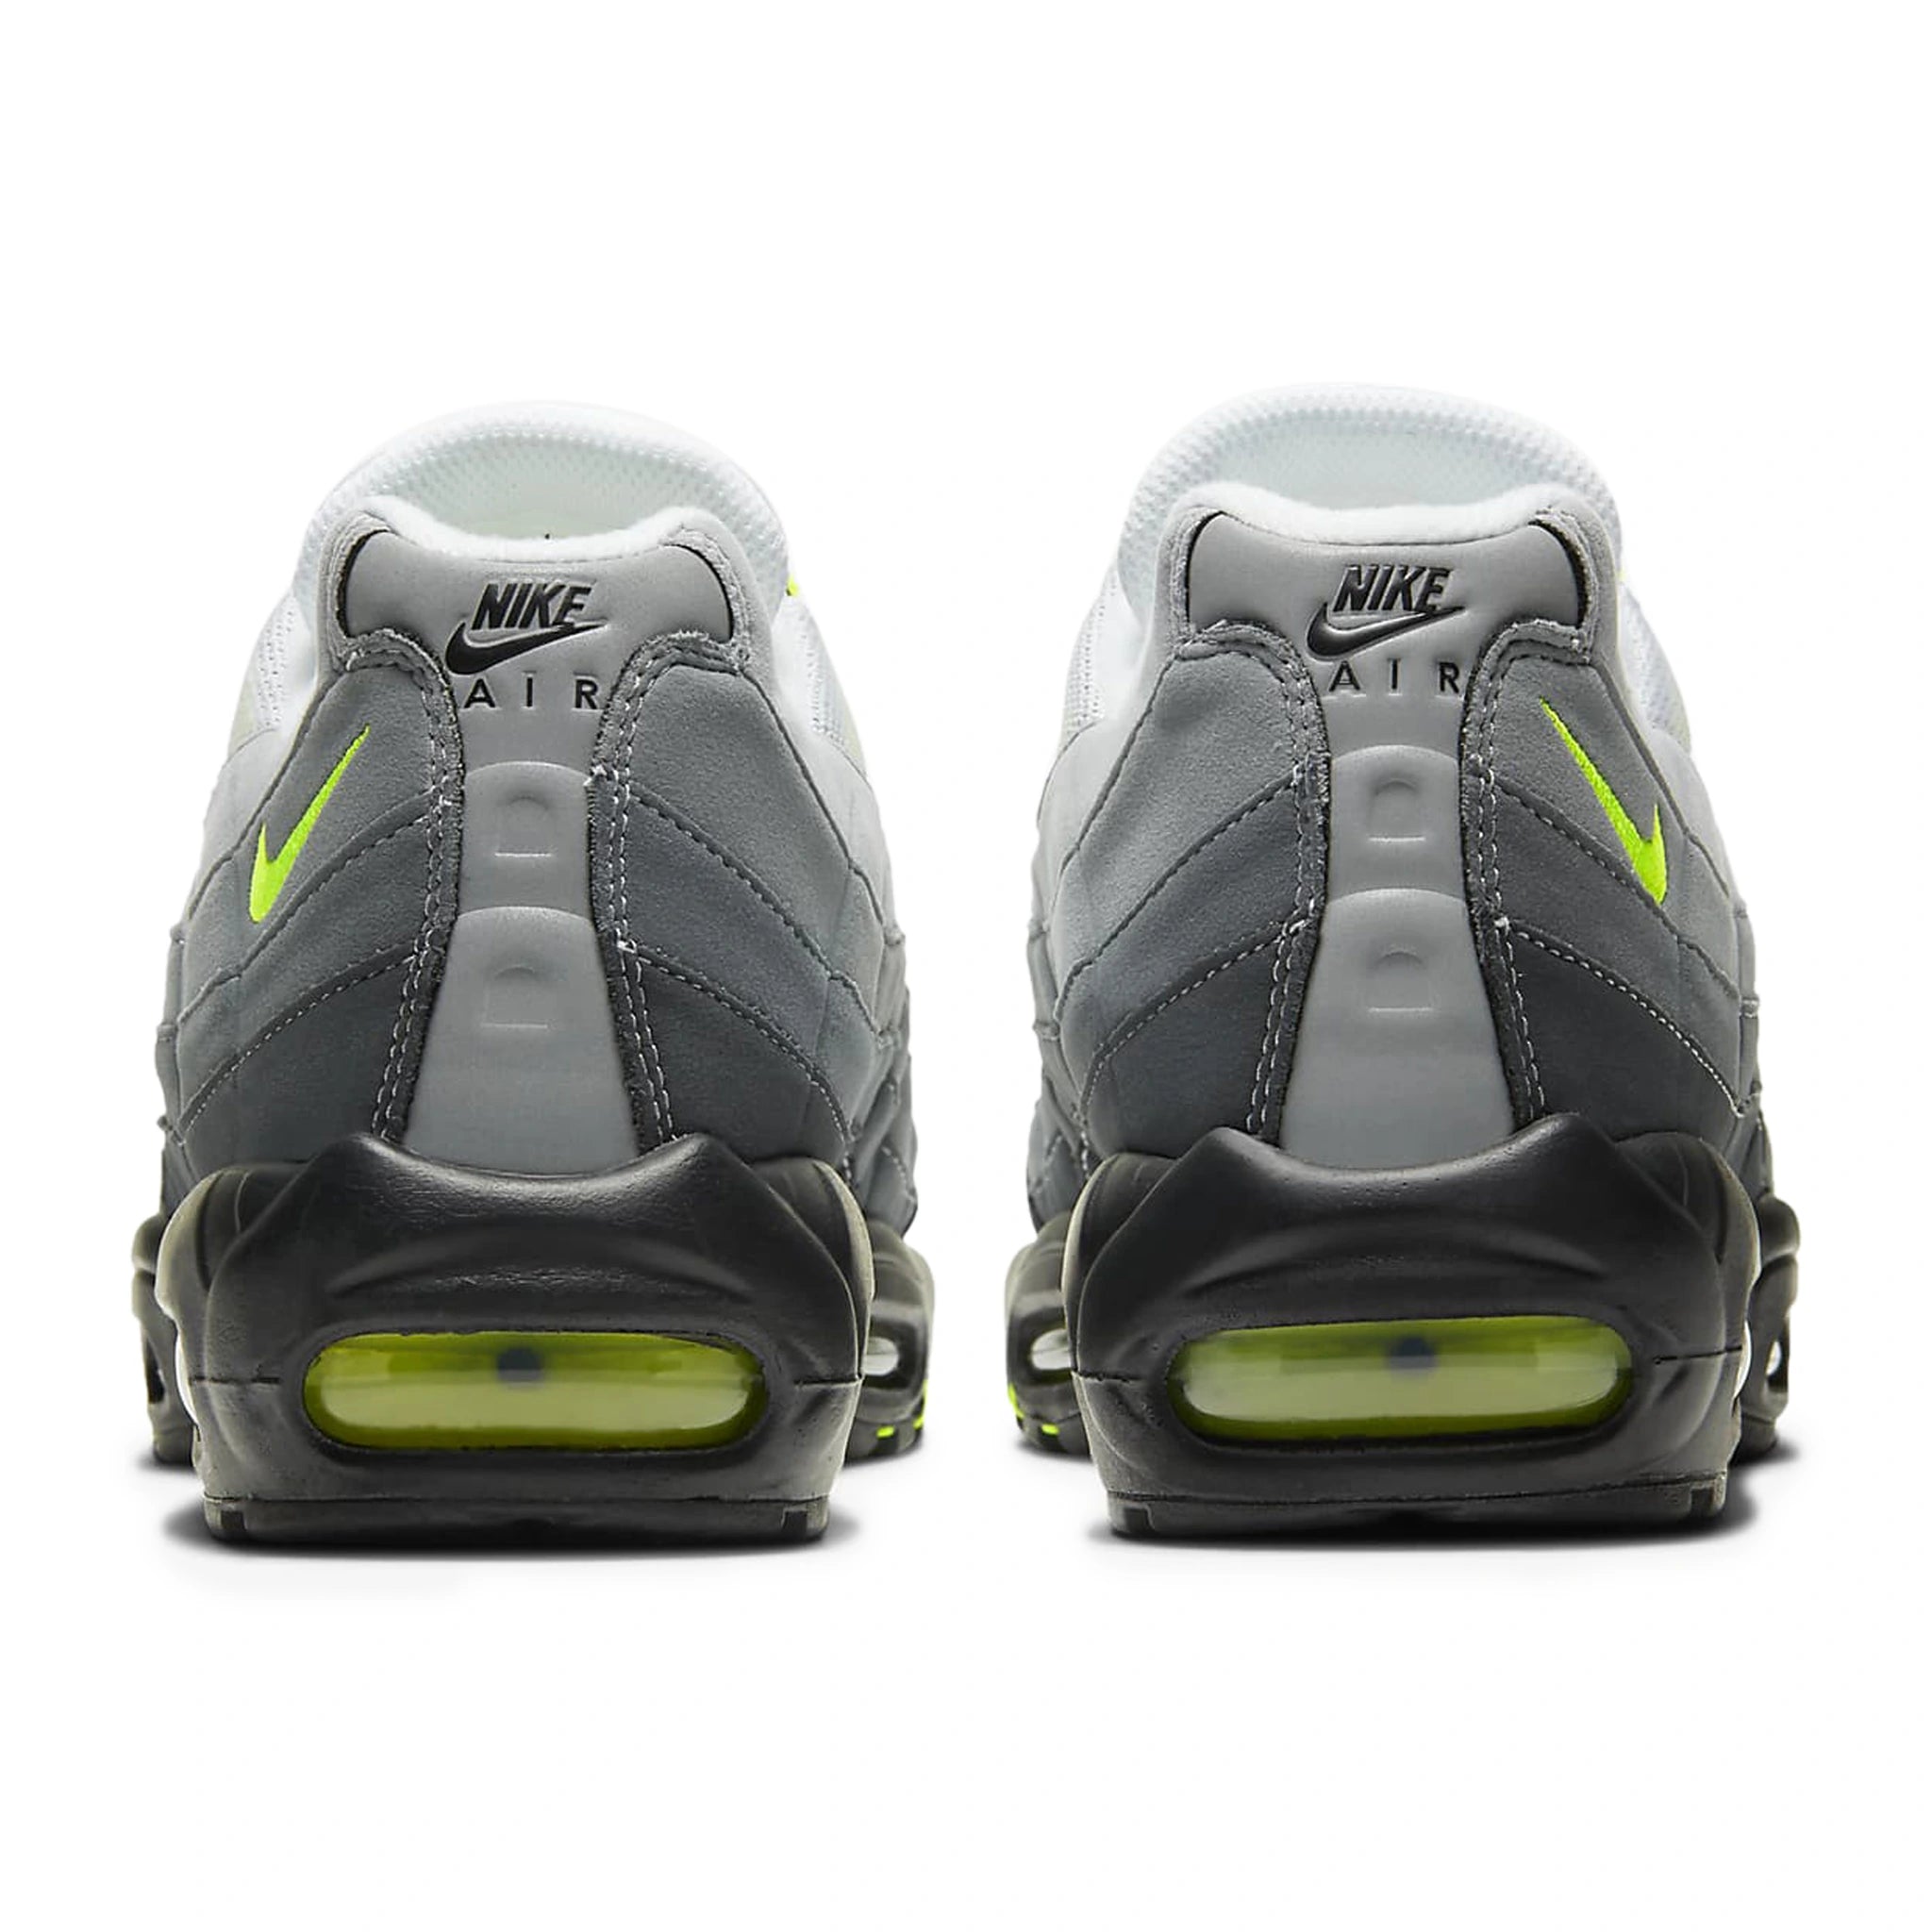 Back view of Nike Air Max 95 OG Neon CT1689-001